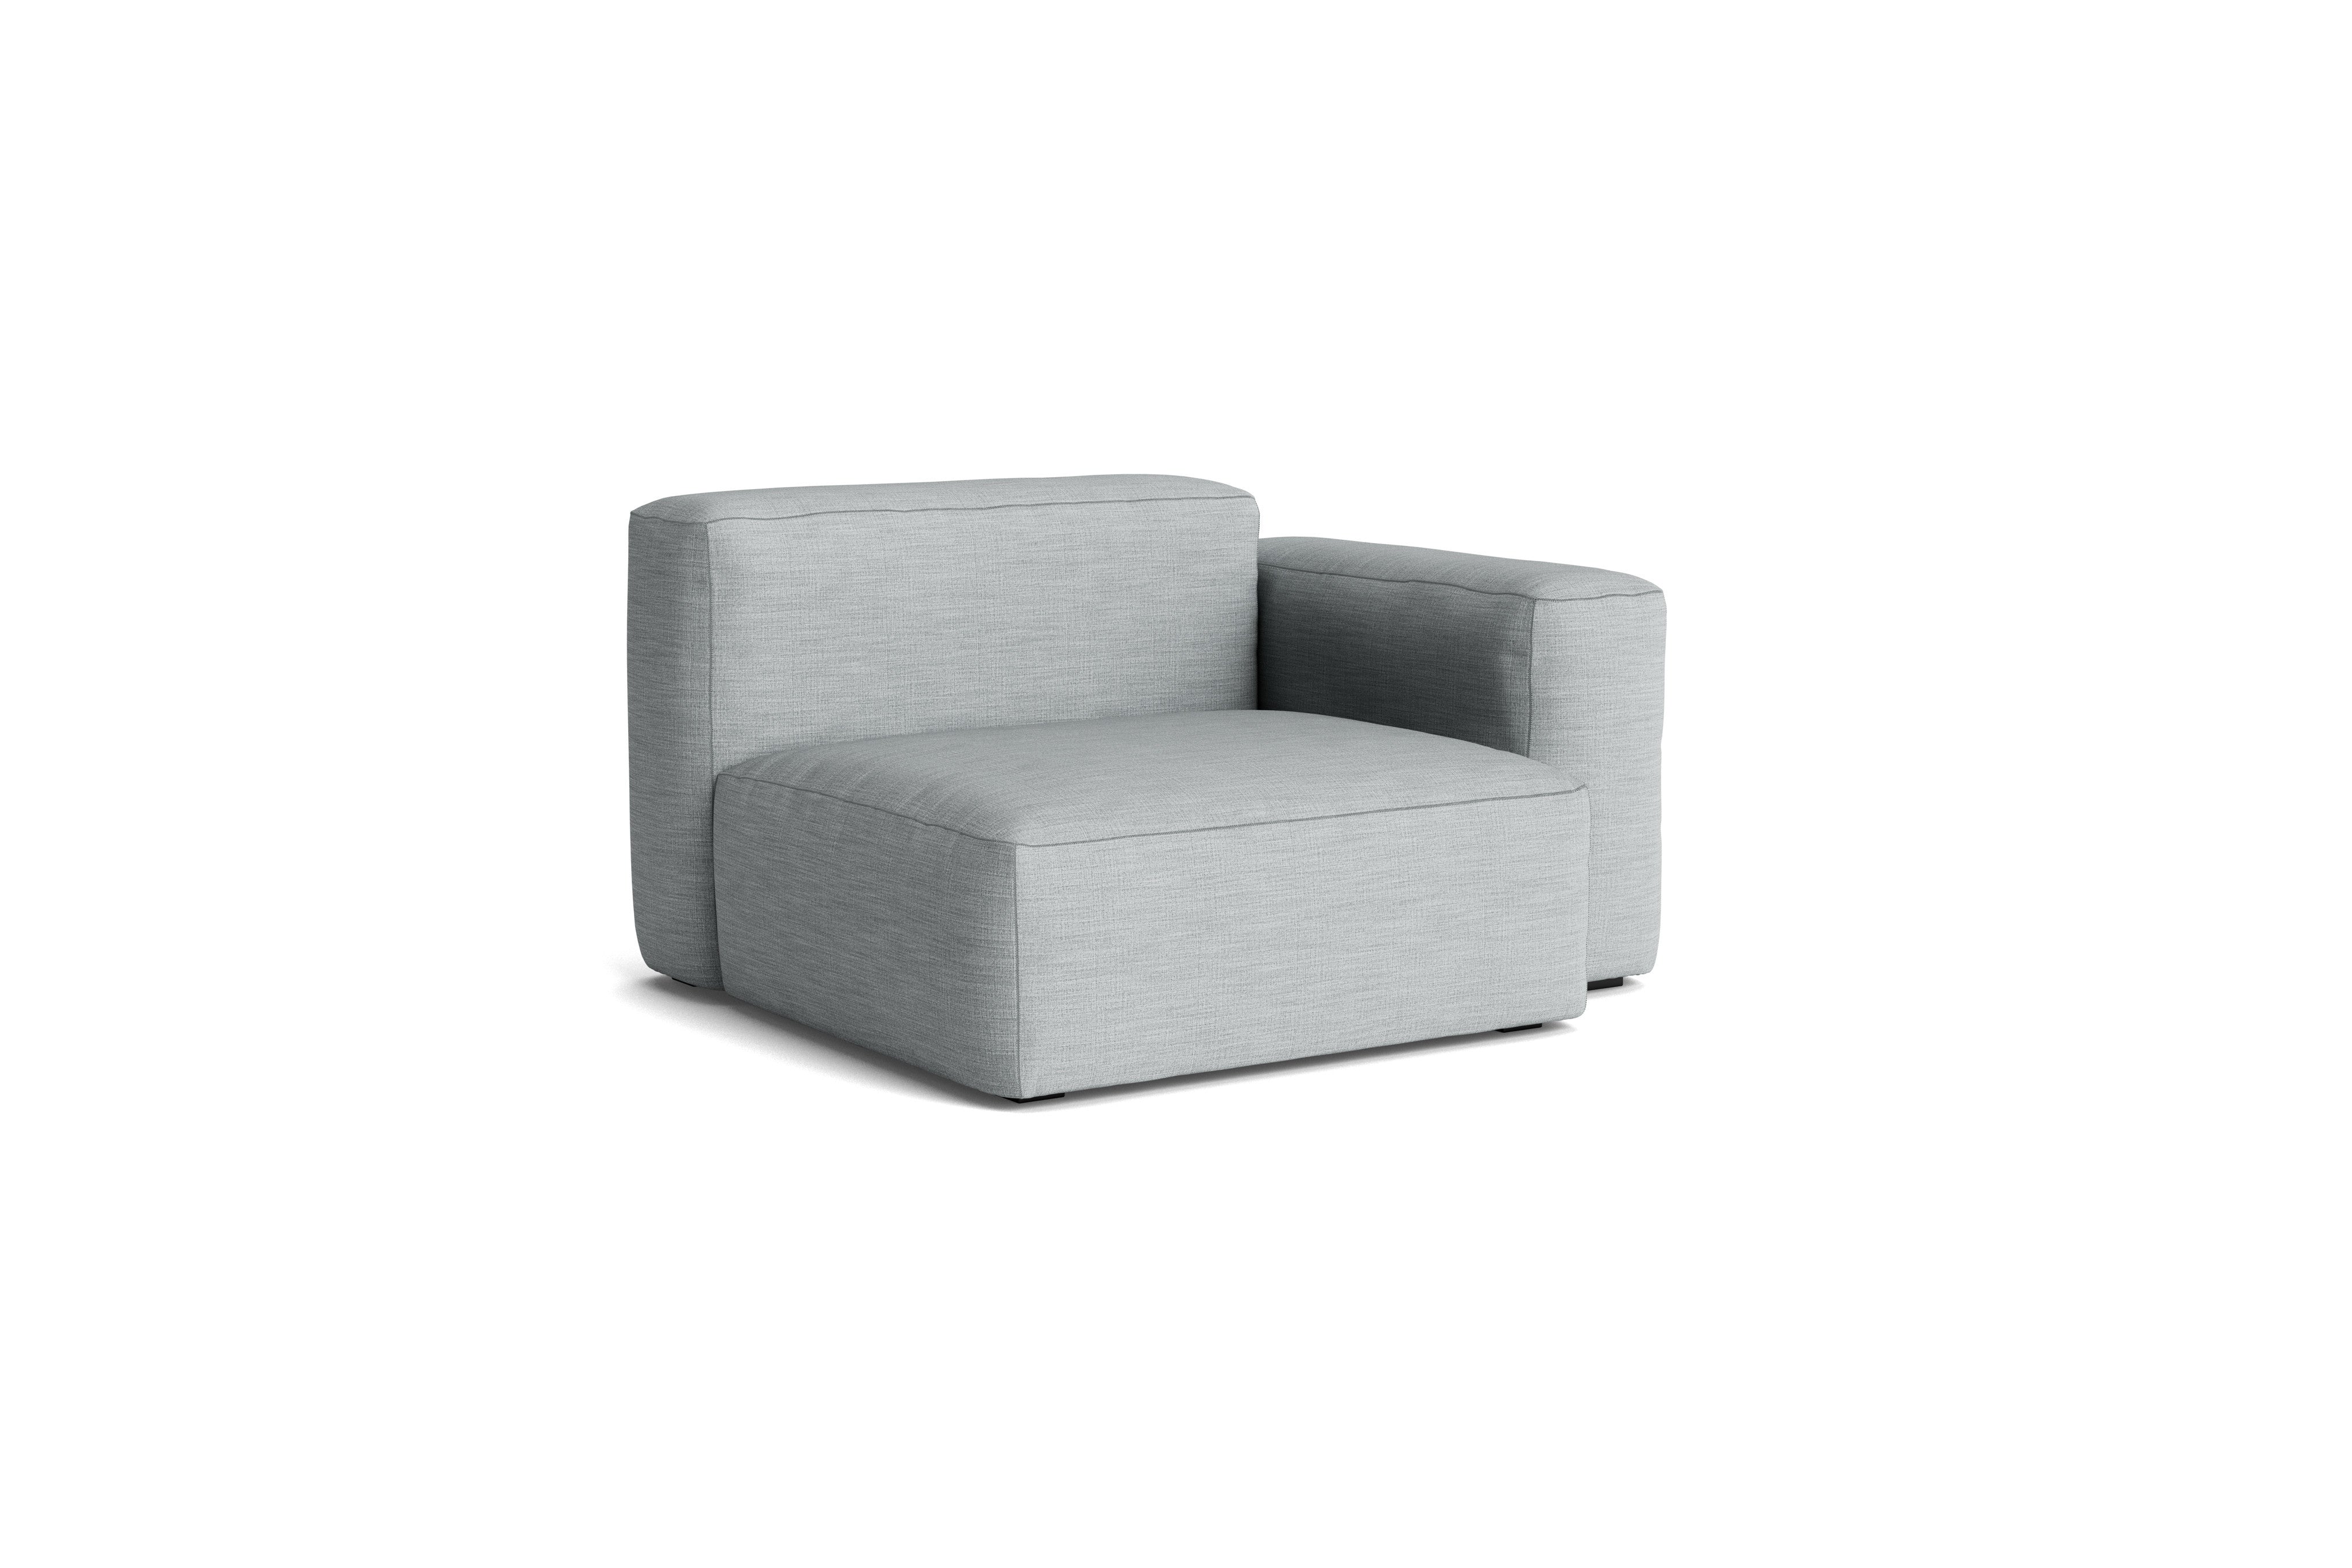 HAY Mags Soft Sofa Low Armrest - Individual Modules